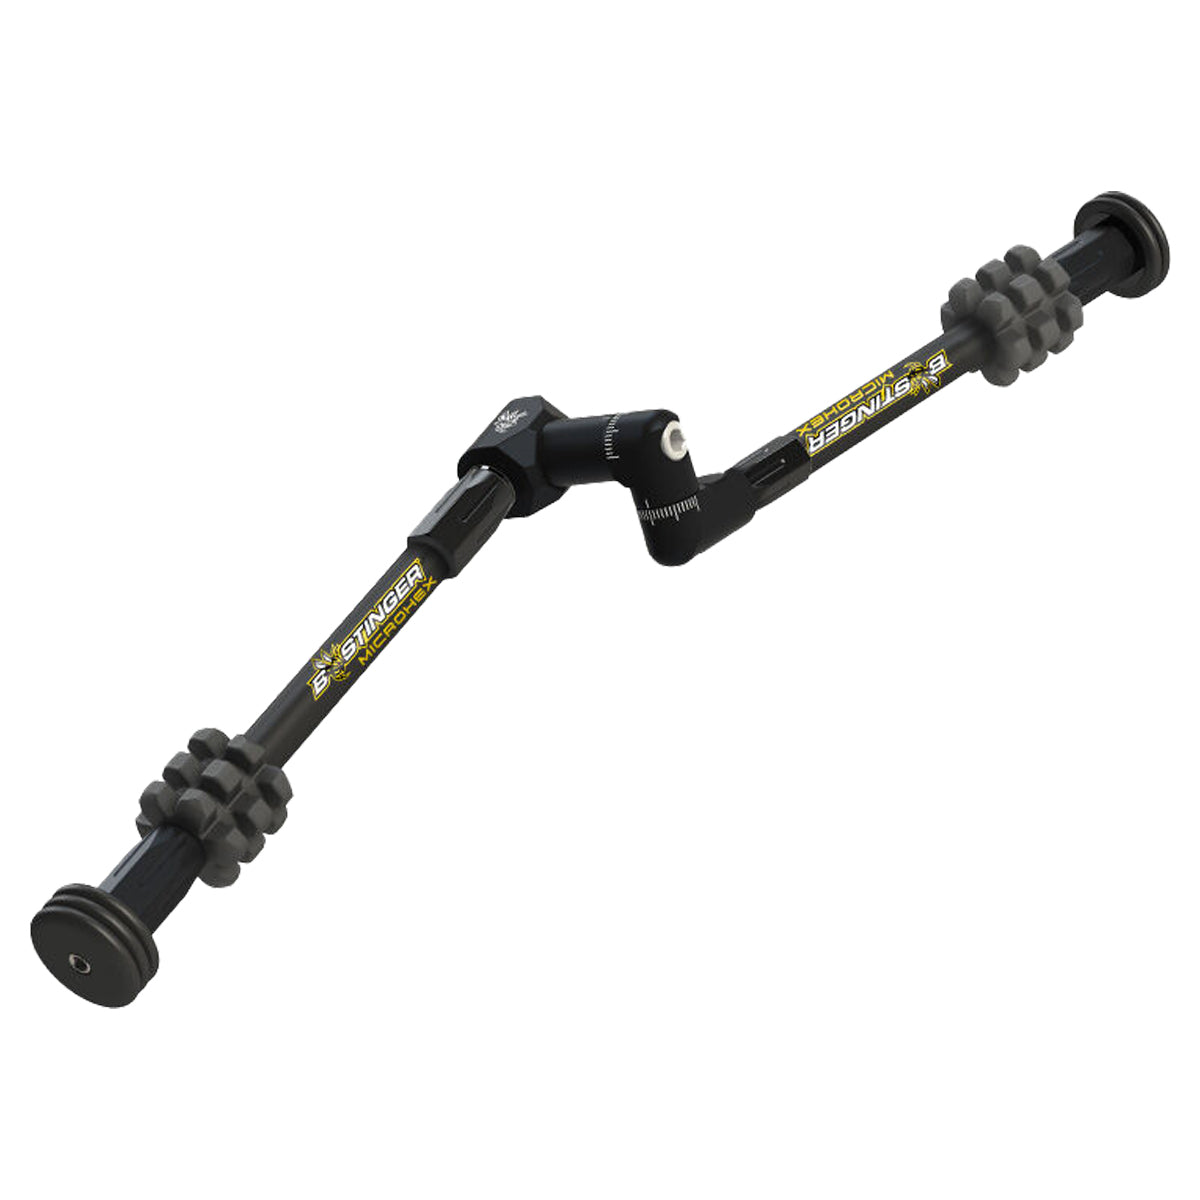 Shop for Bee Stinger Microhex Xtreme System Stabilizer Kit | GOHUNT